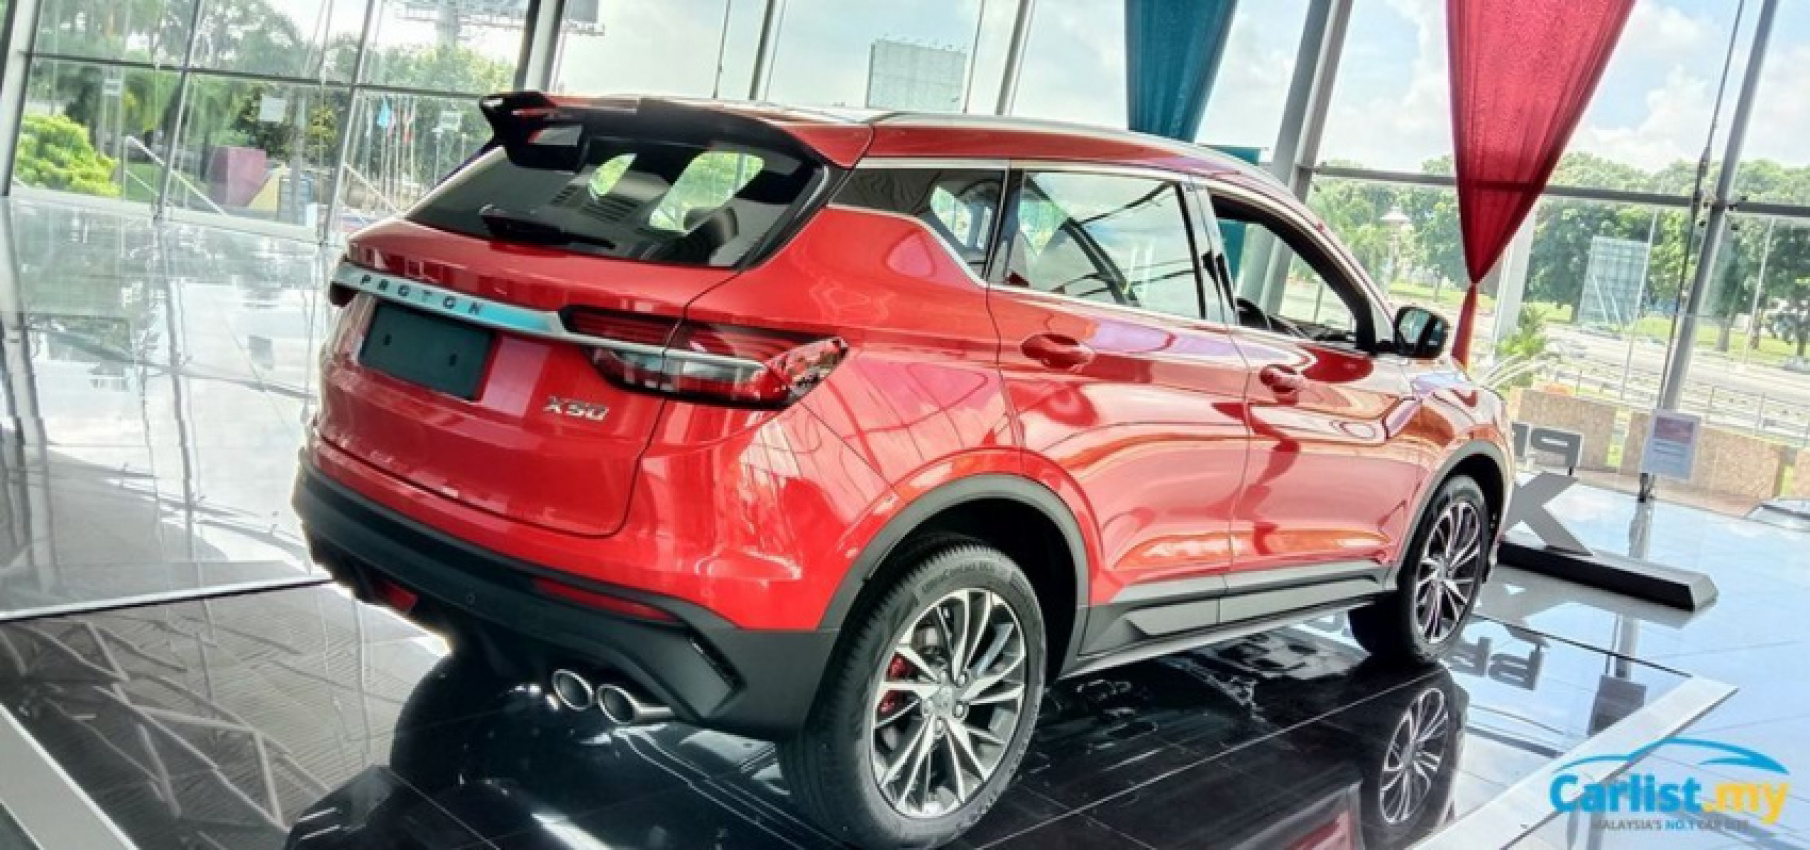 autos, cars, reviews, geely, insights, proton x50, x50, x50 booking, x50 launch, x50 malaysia, x50 preview, proton has delivered over 2,000 x50s – will they meet their 2020 targets of 9,000?